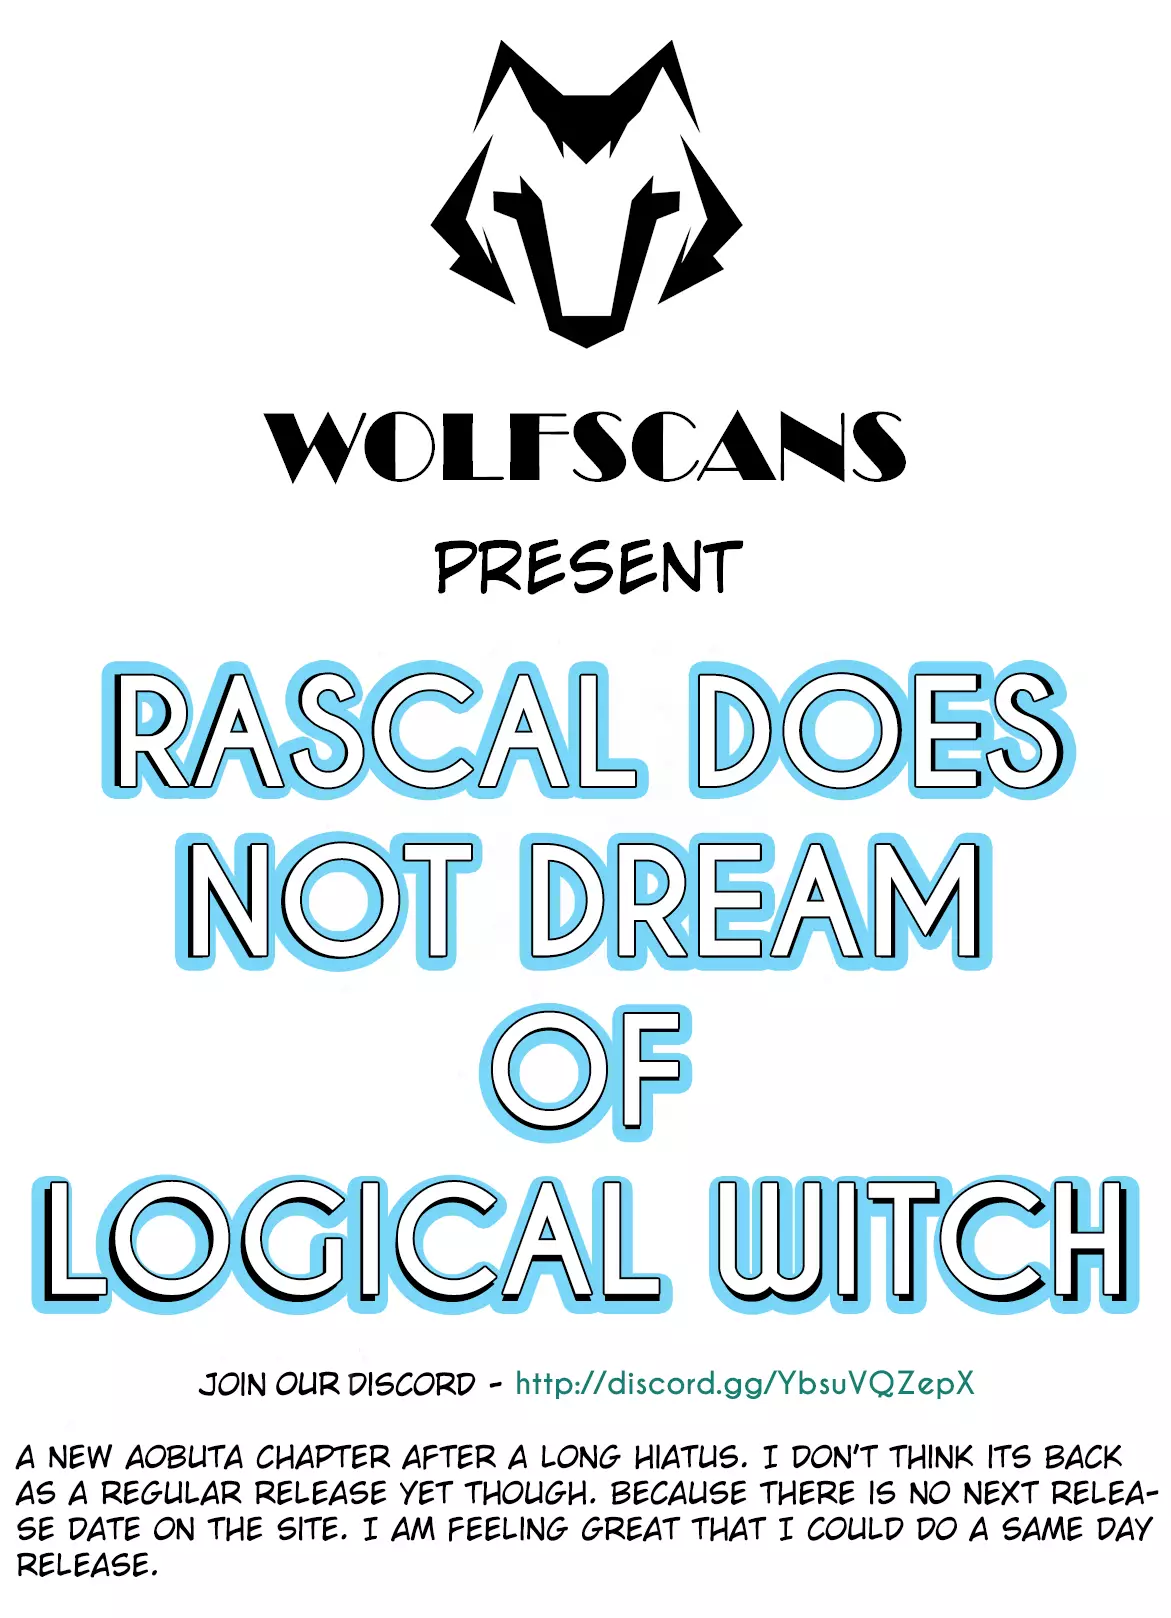 Rascal Does Not Dream Of Logical Witch - 0.9 page 22-0c73b0e1